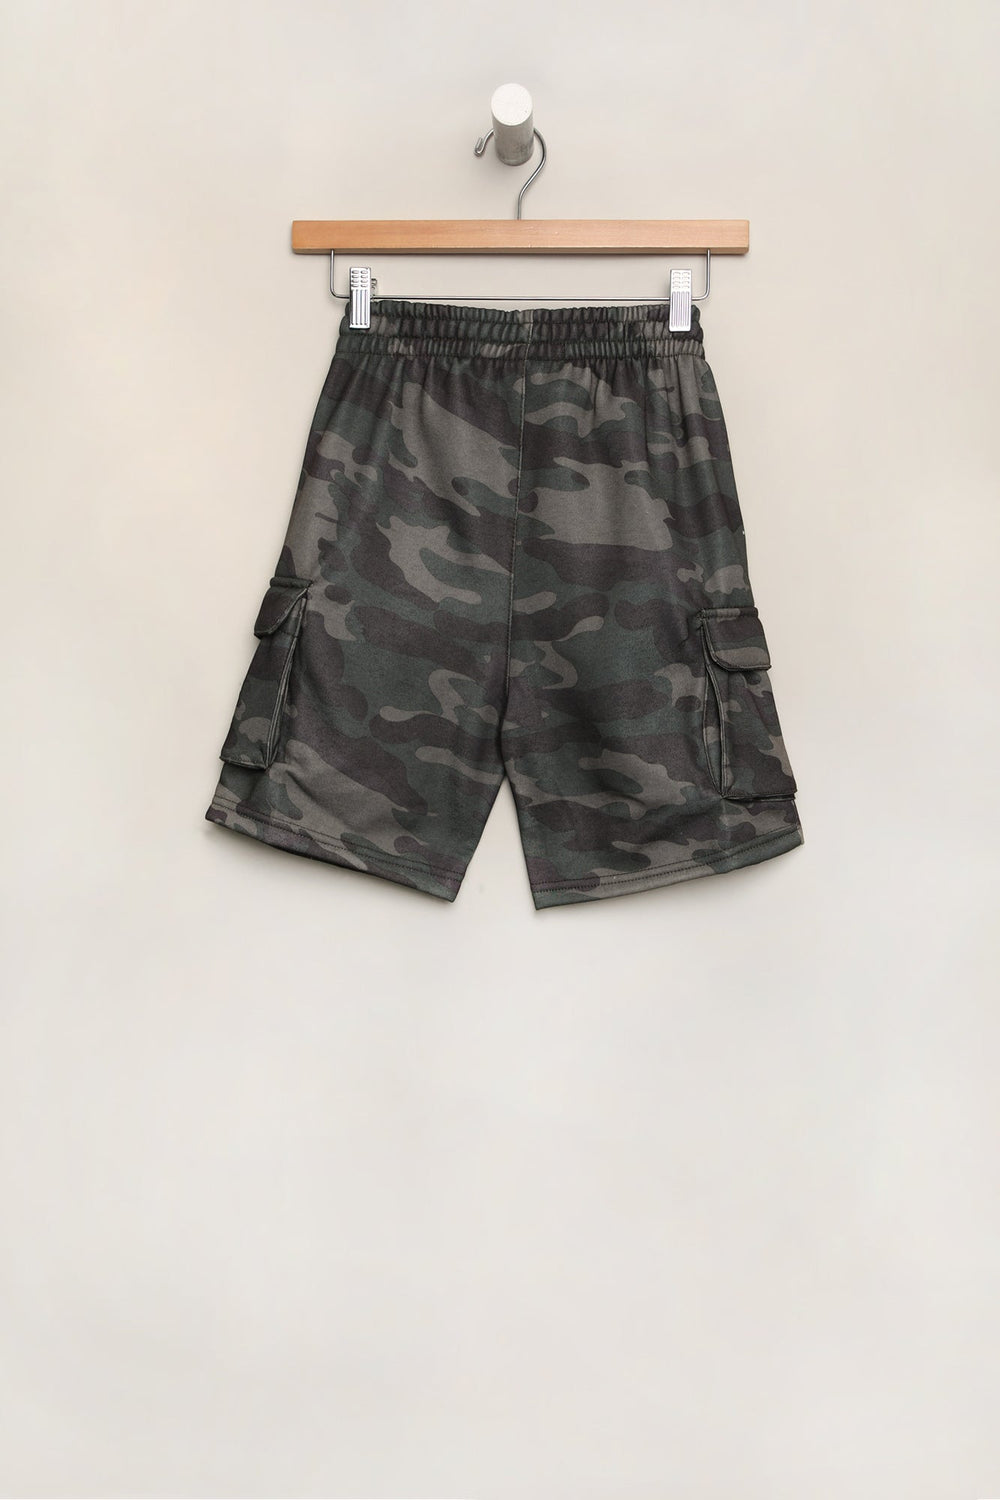 West49 Youth Fleece Camo Cargo Shorts West49 Youth Fleece Camo Cargo Shorts